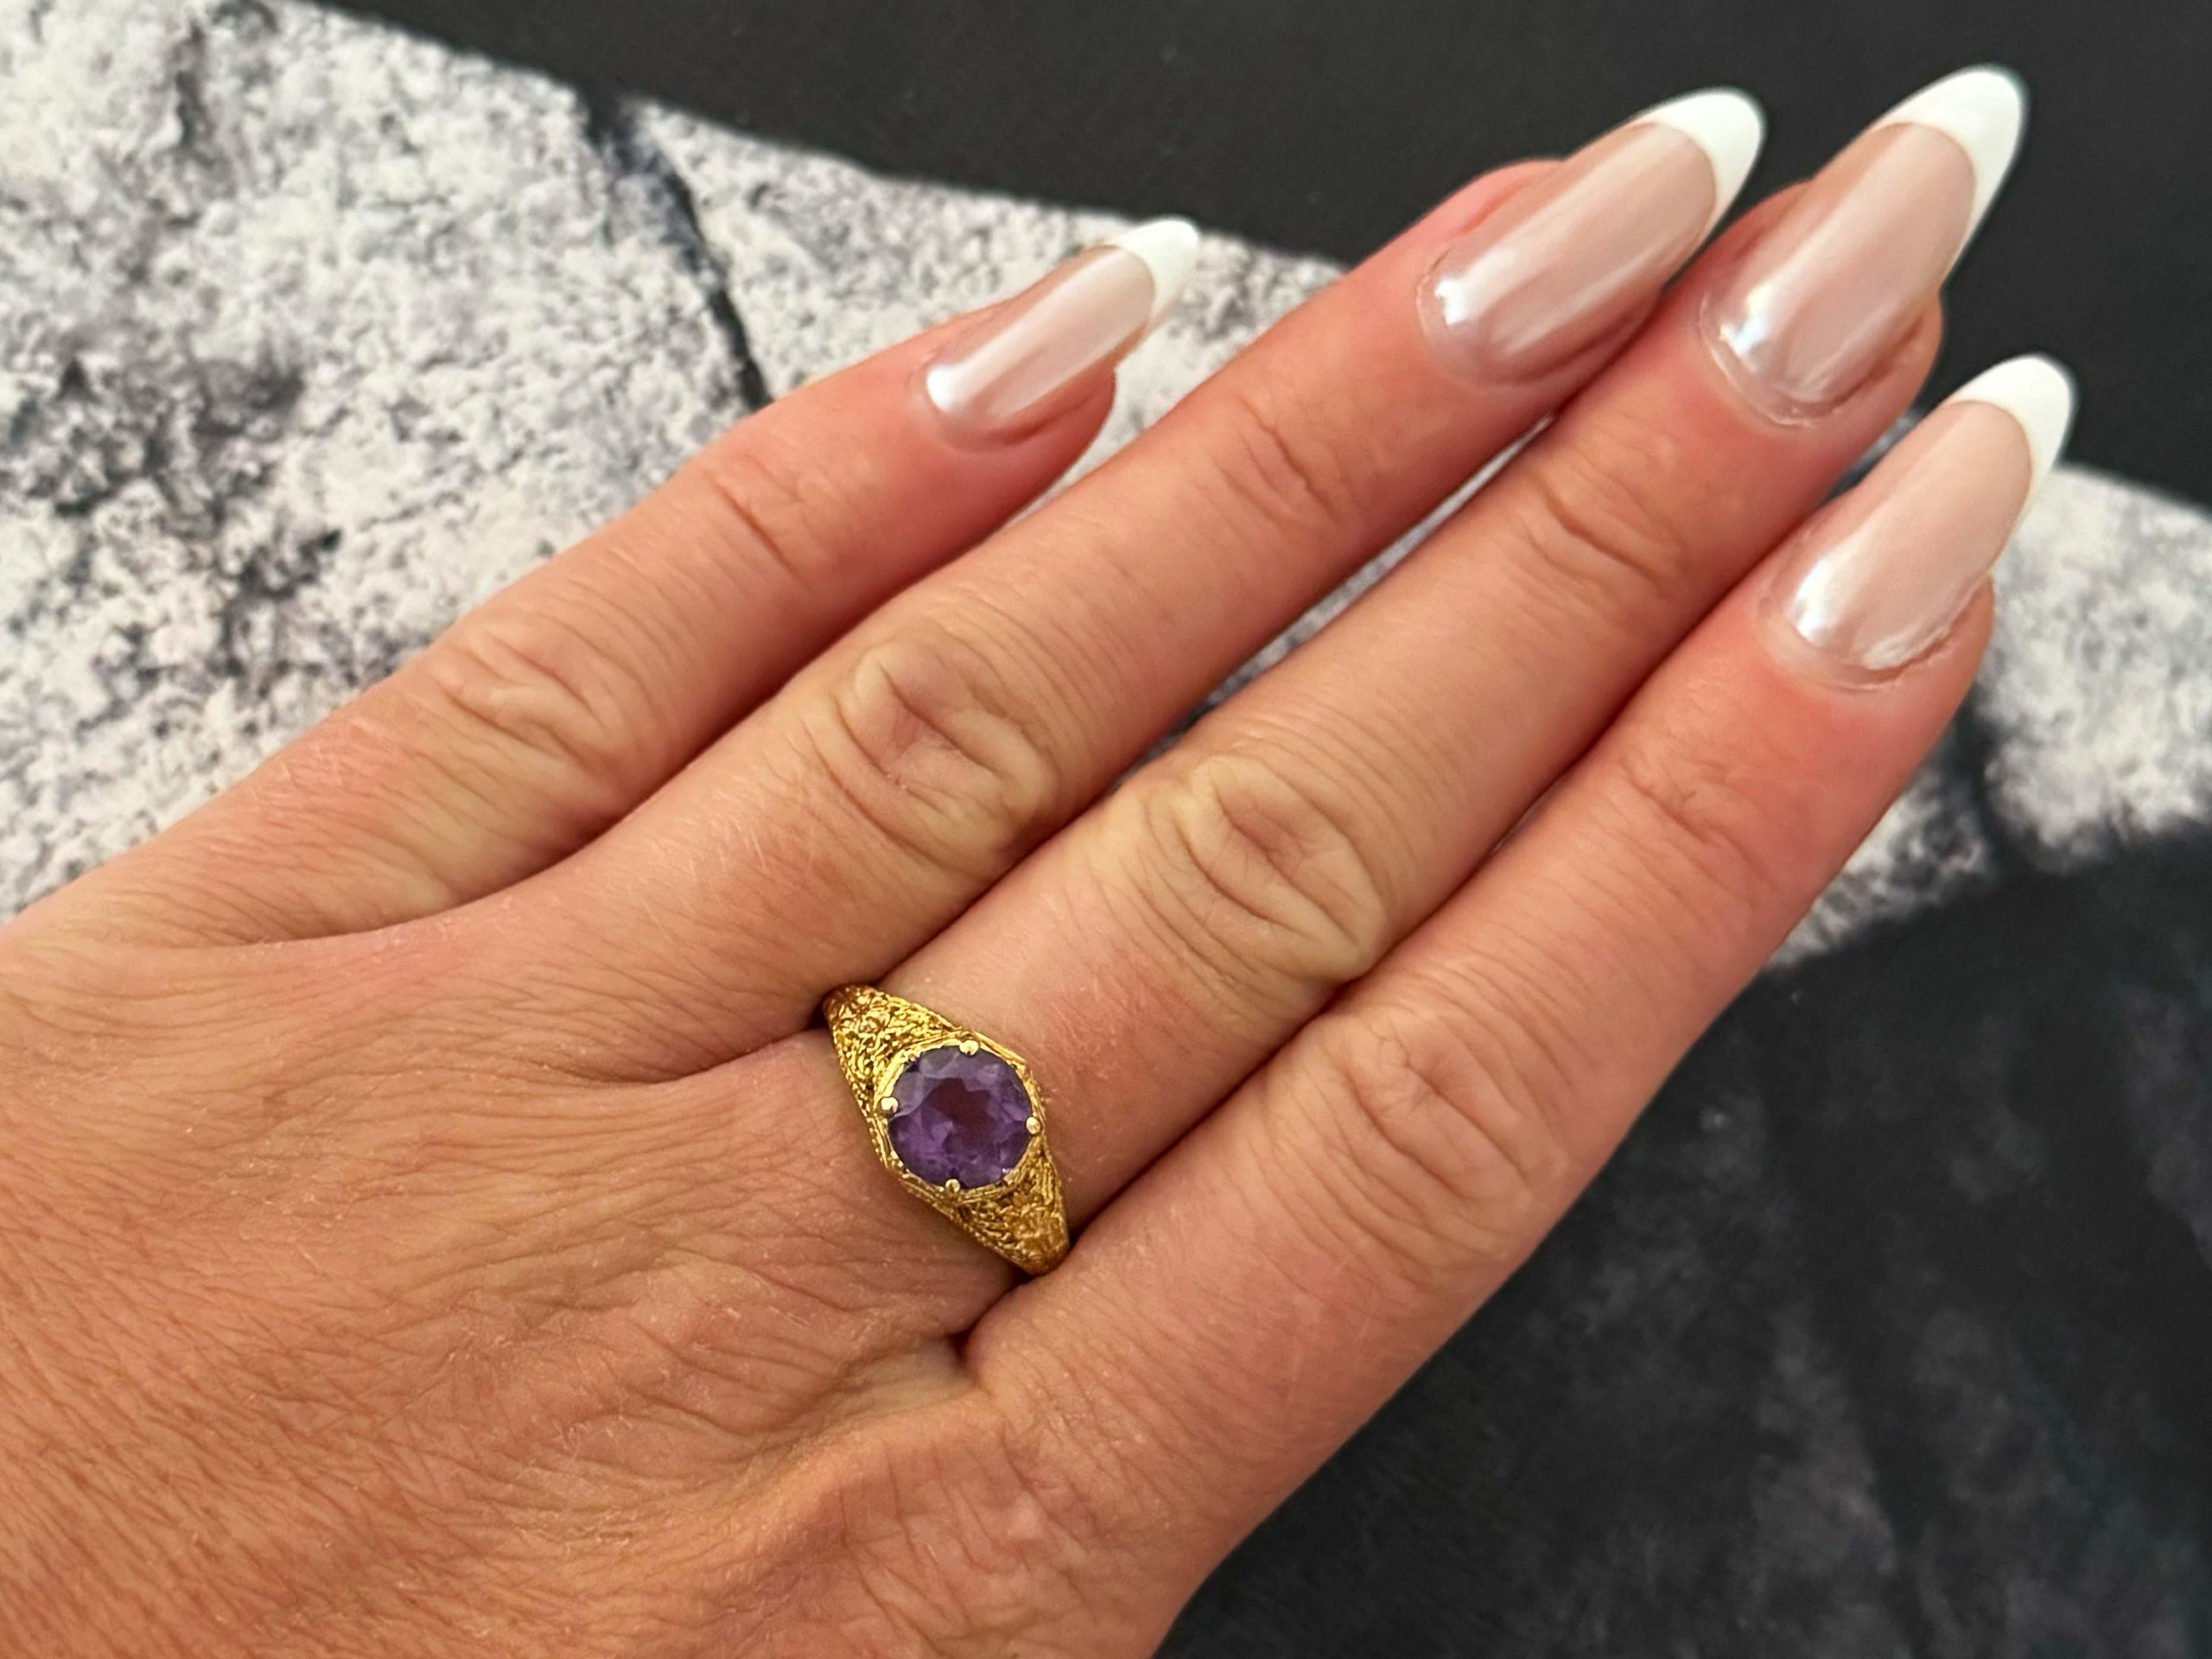 Ring Specifications:

Metal: 14k Yellow Gold

Total Weight: 3.4 Grams

Gemstone: 1 Round cut amethyst 

Ring Size: 7.5 (resizable)

Stamped: 